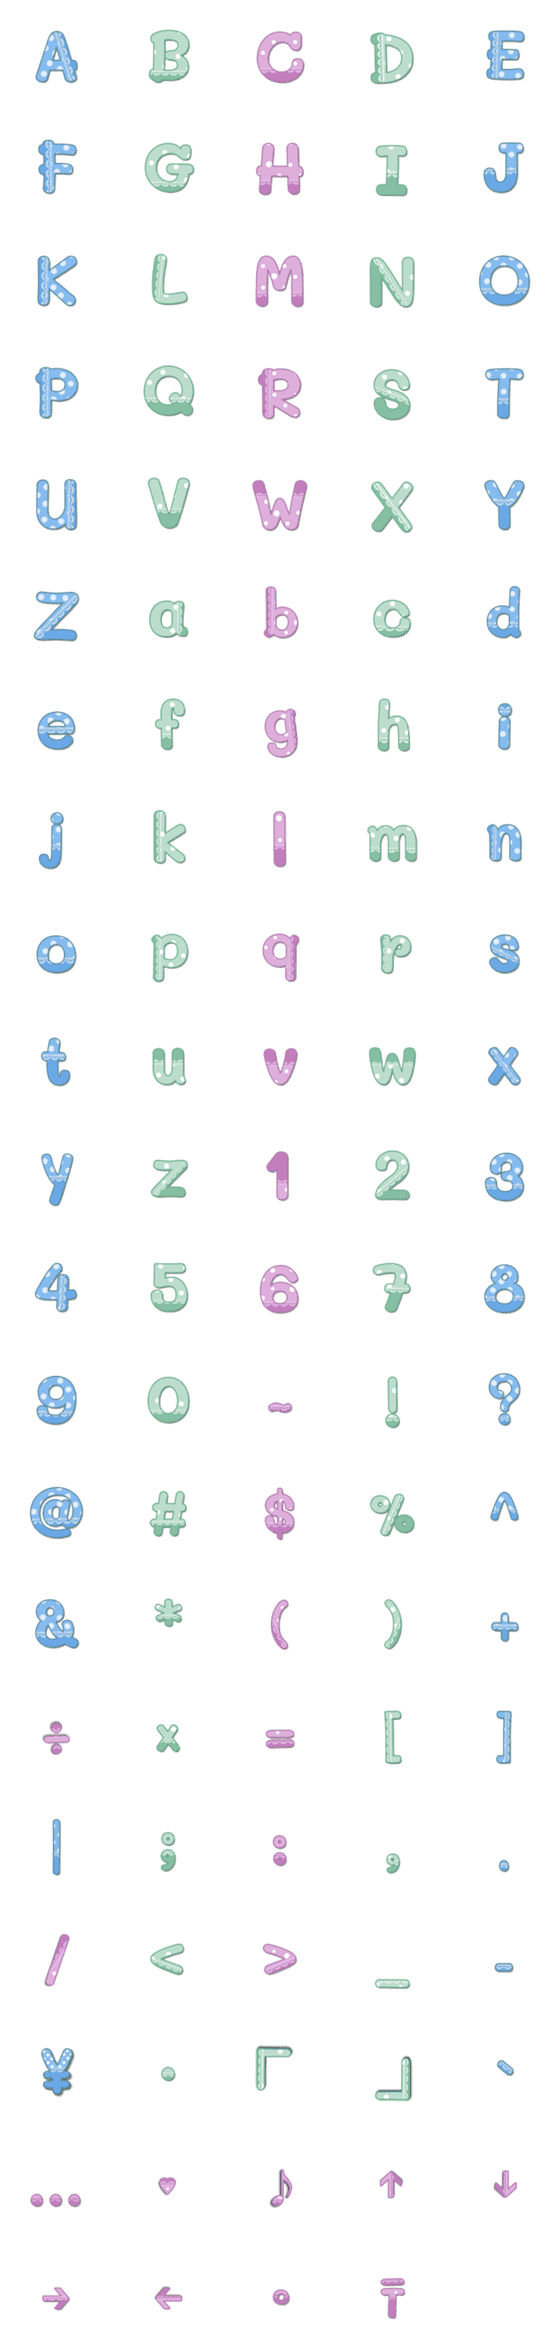 [LINE絵文字]Font pastelの画像一覧